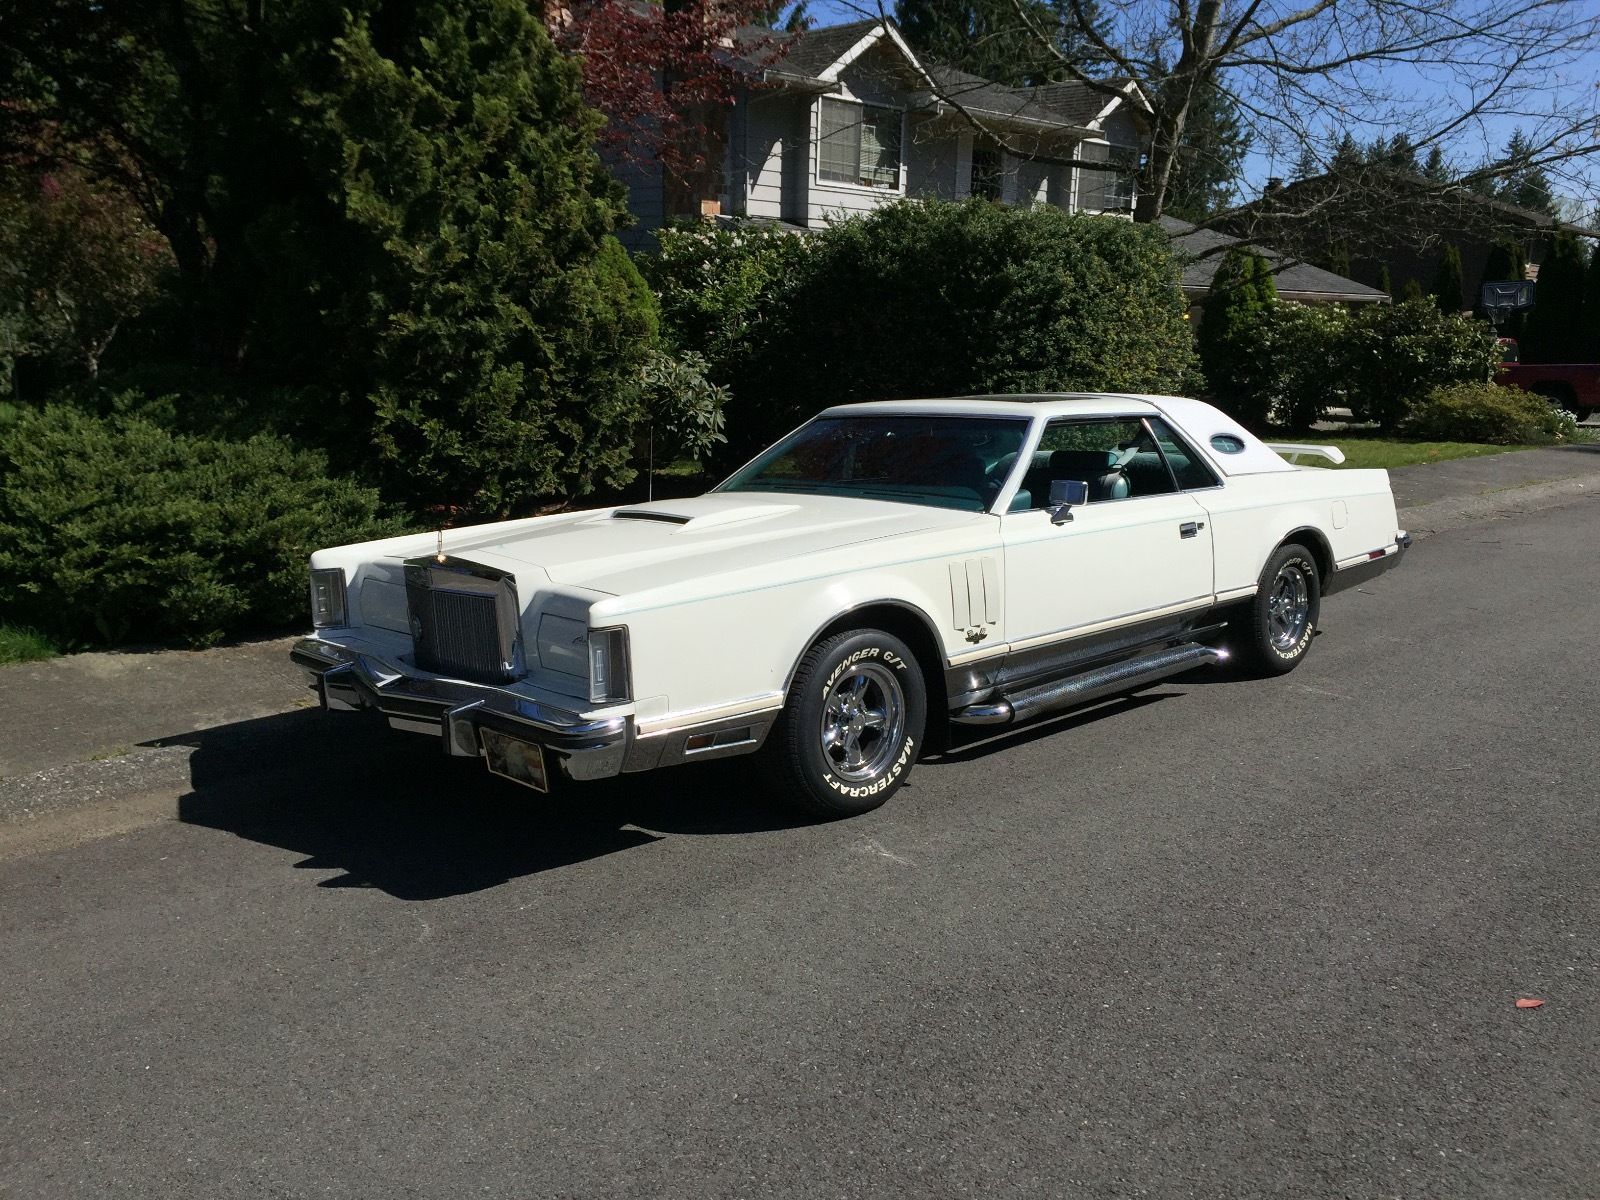 This Hot-Rodded 1979 Lincoln Mark V Has The Brawn, But Could Use A Touch Of Beauty…How Would You Sort This Continental Out?